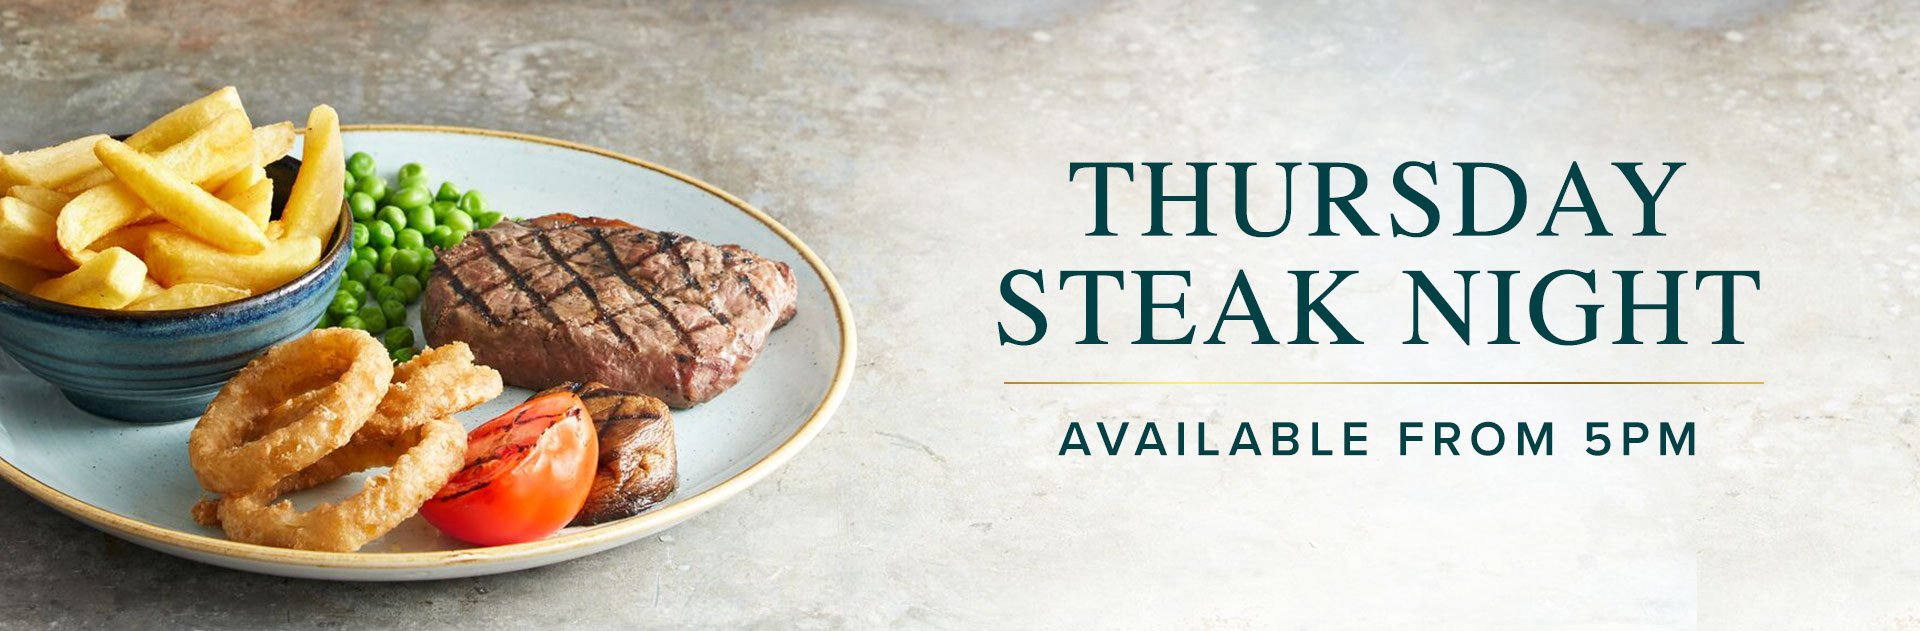 Thursday Steak Night at The Hare and Hounds